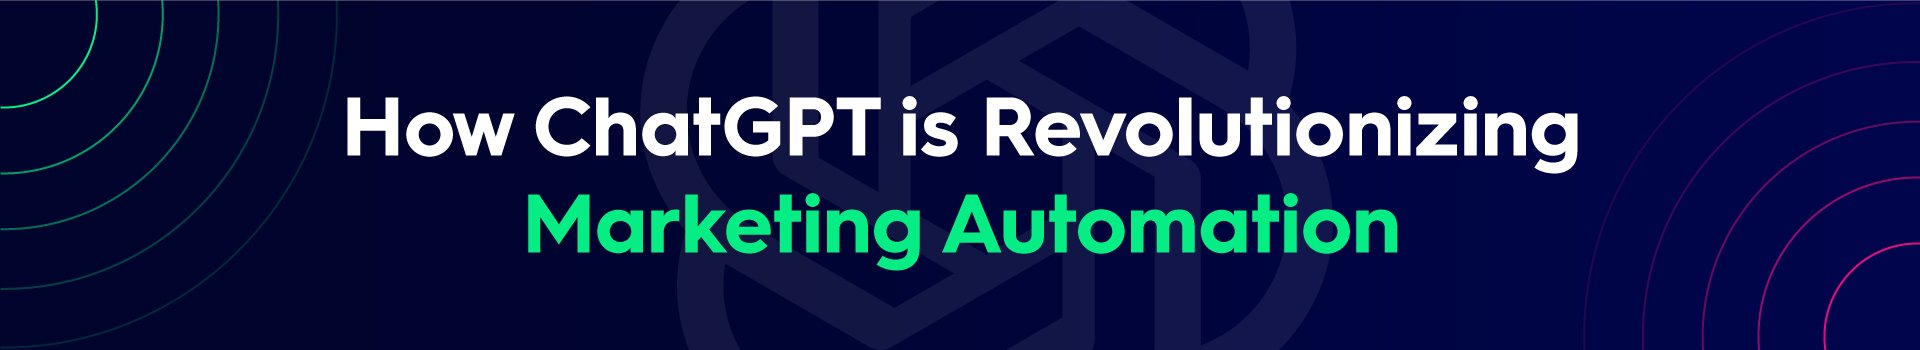 How ChatGPT is Revolutionizing Marketing Automation